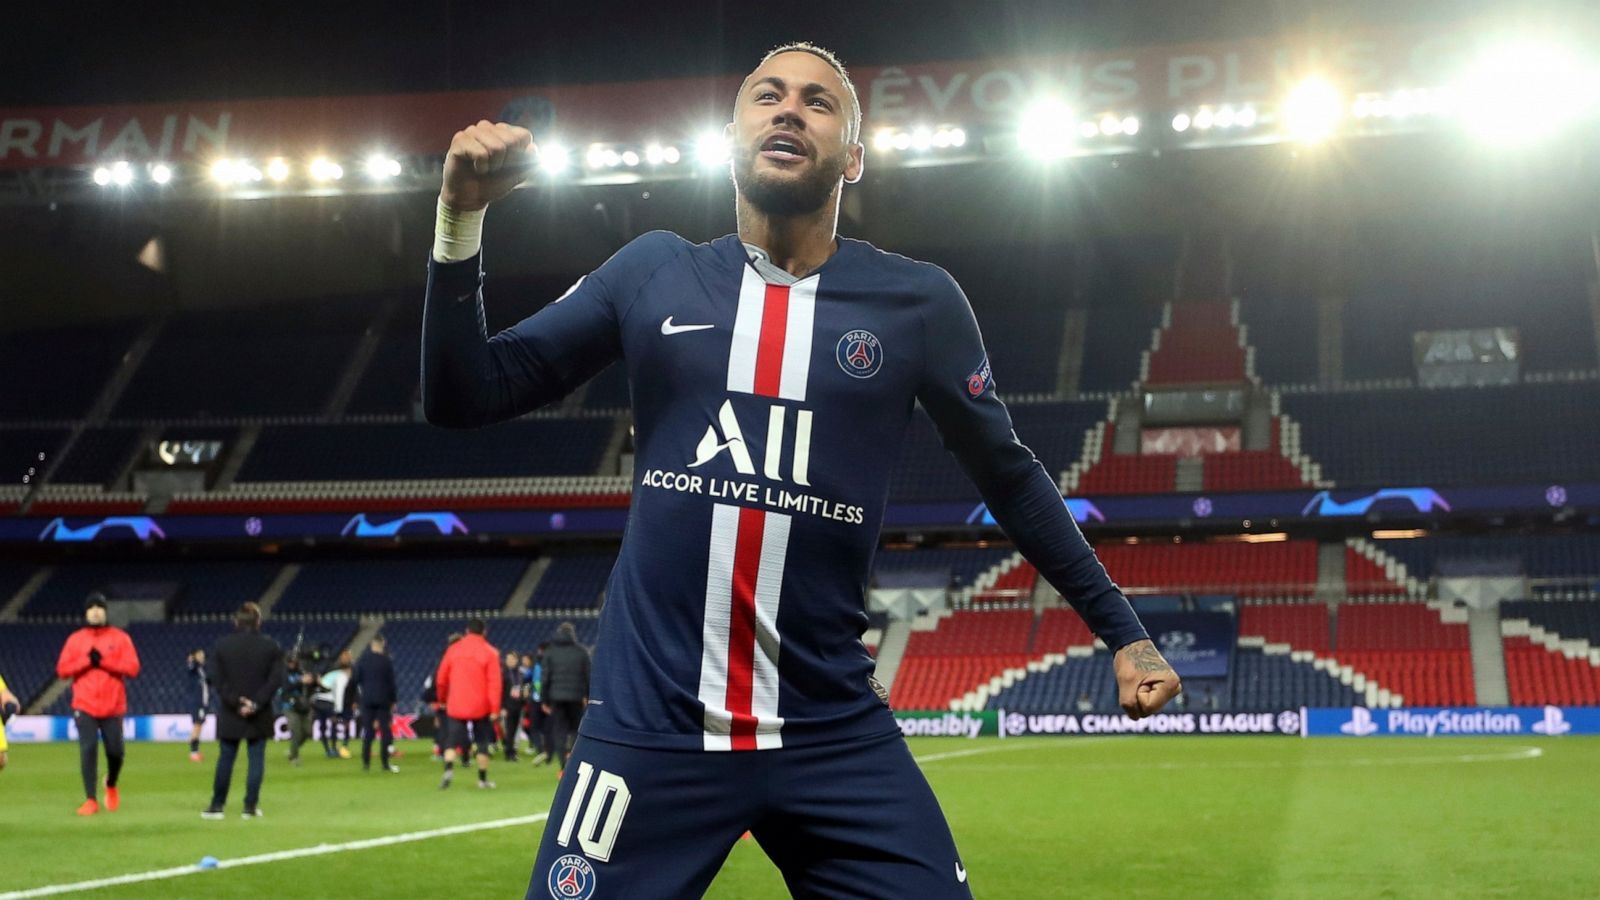 PSG declared French league champion as season ends early